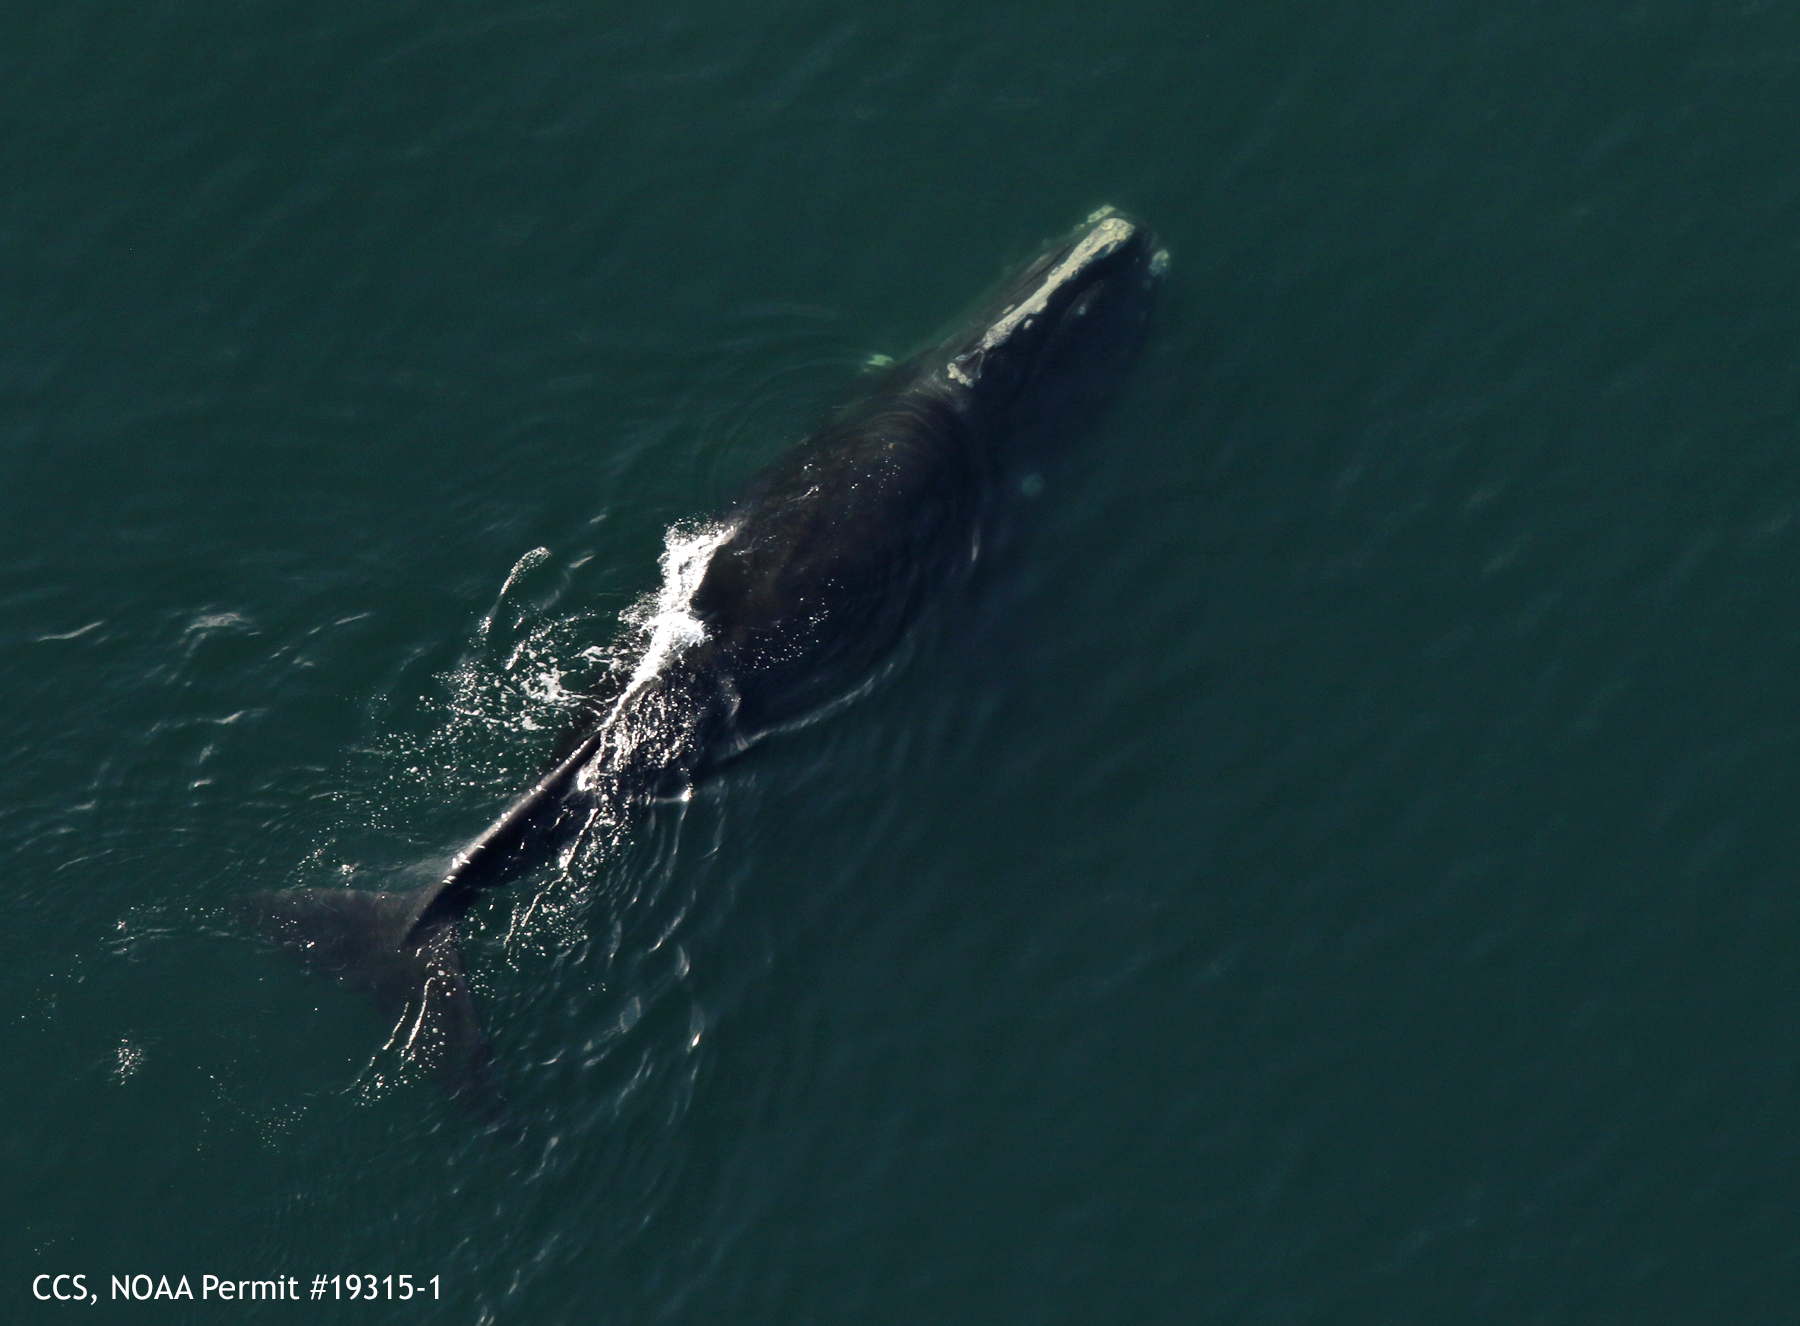 north atlantic right whale #3845, known as mogul, swims in cape cod bay on march 1st 2019